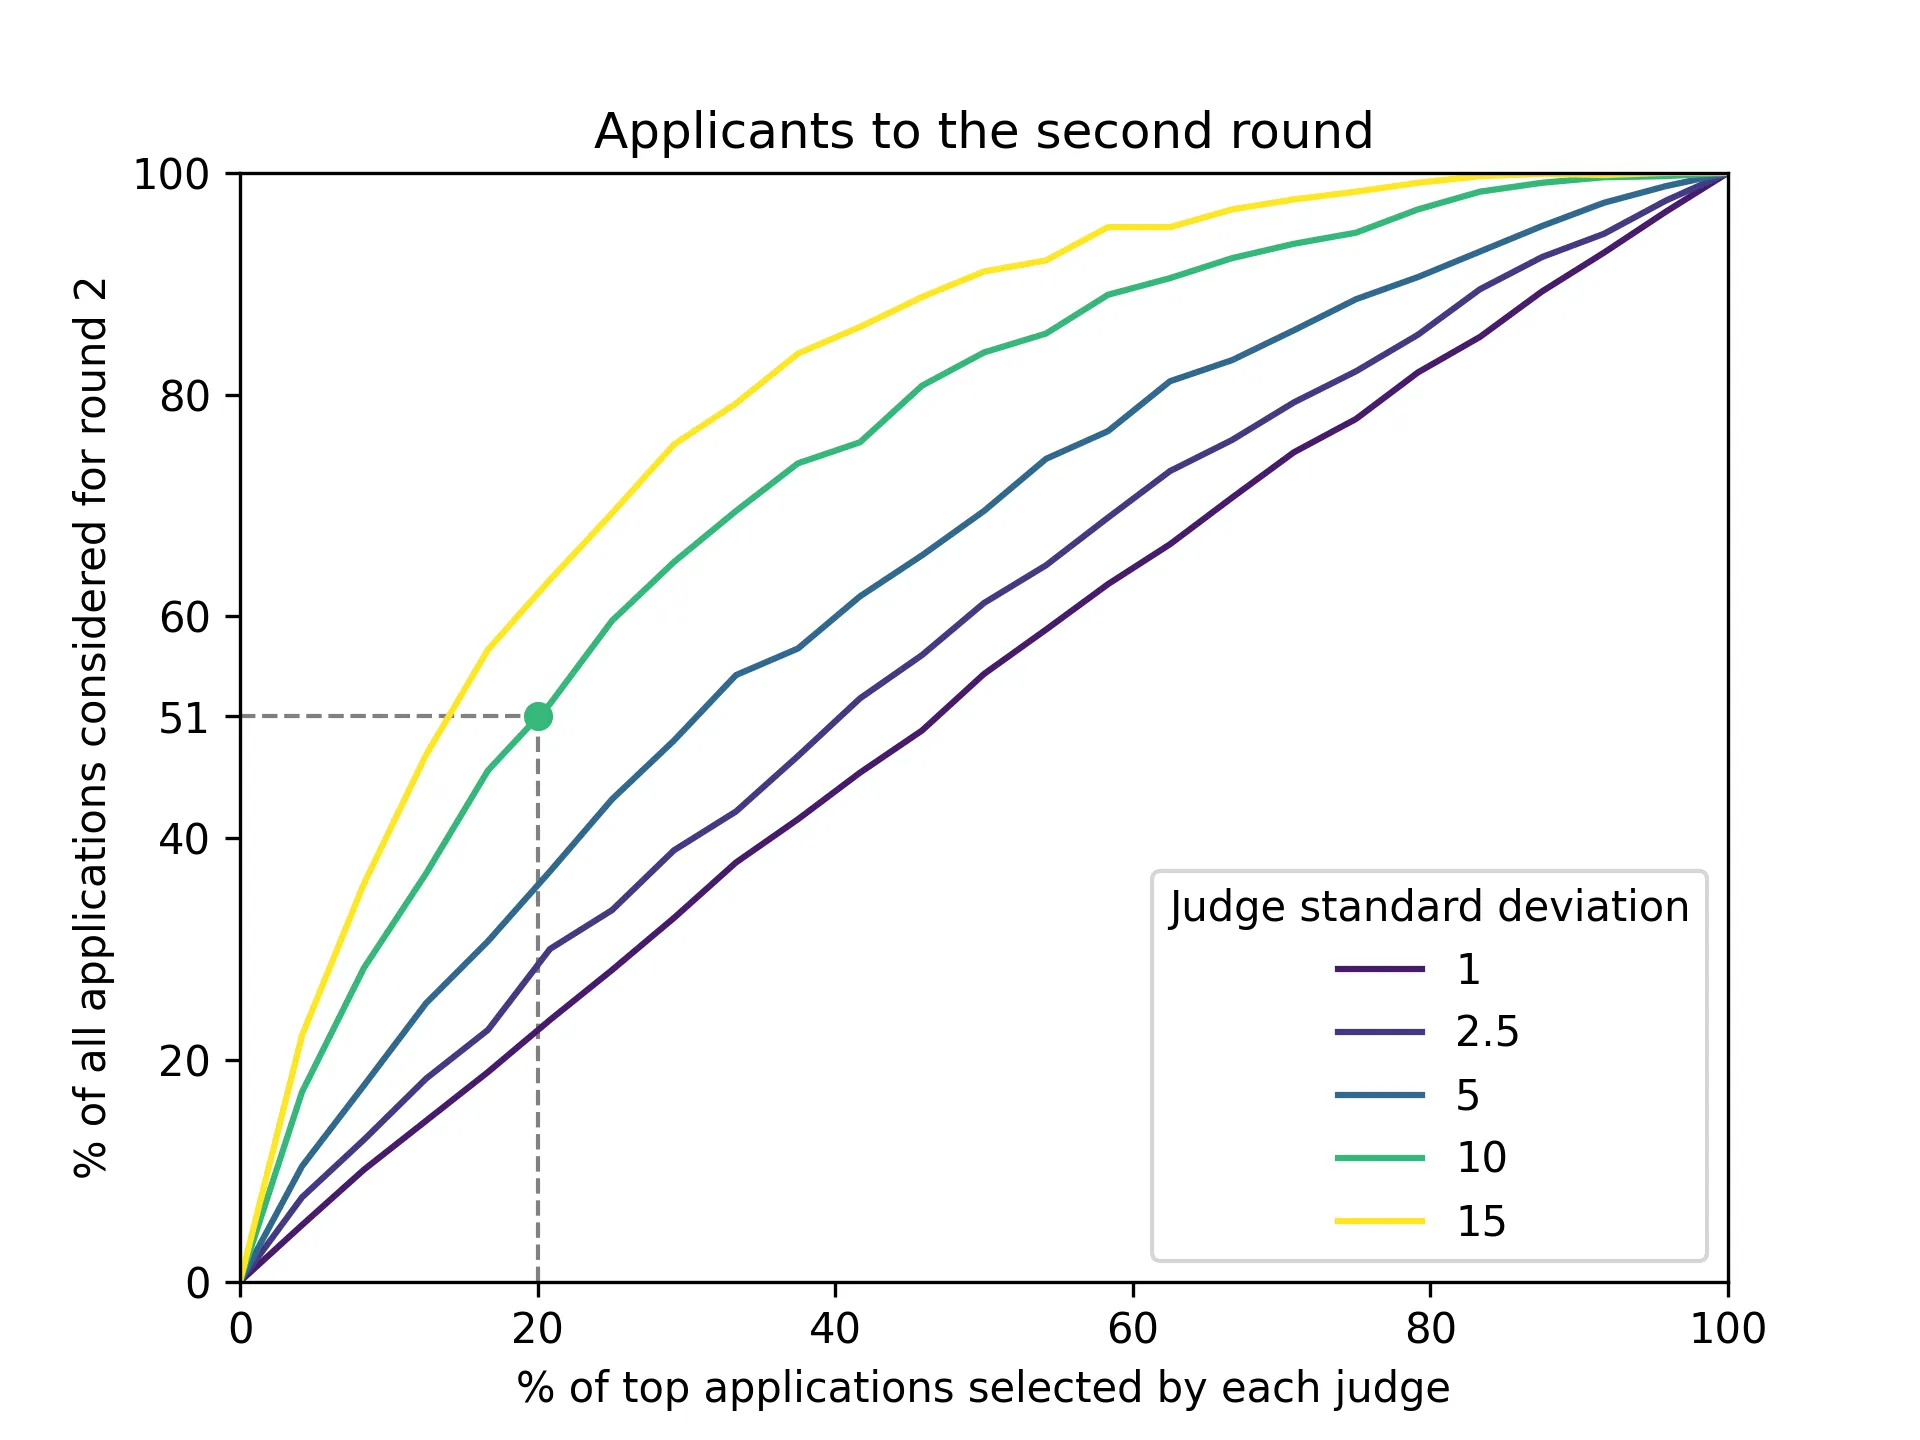 A chart showing the.% of abstracts considered for round 2 as a function of the number of applications selected by each judge, for different error levels. See below for another explanation.